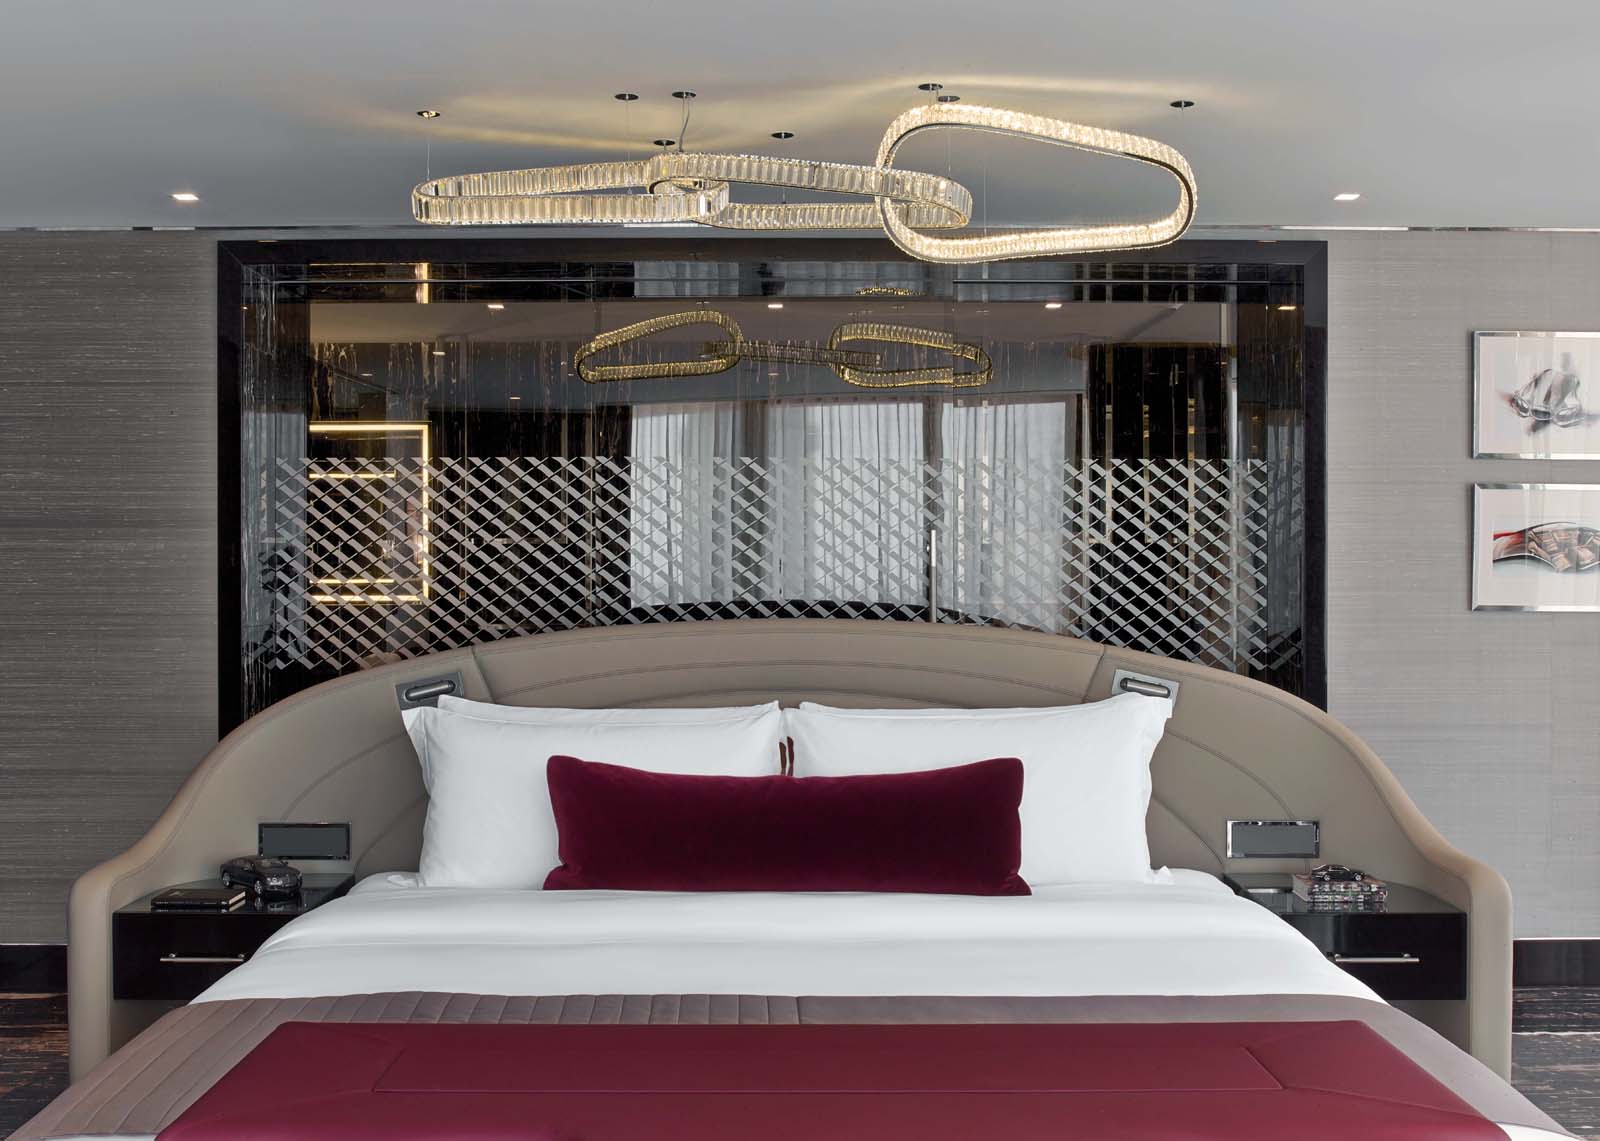 new-bentley-suite-debuts-at-the-st-regis-istanbul9